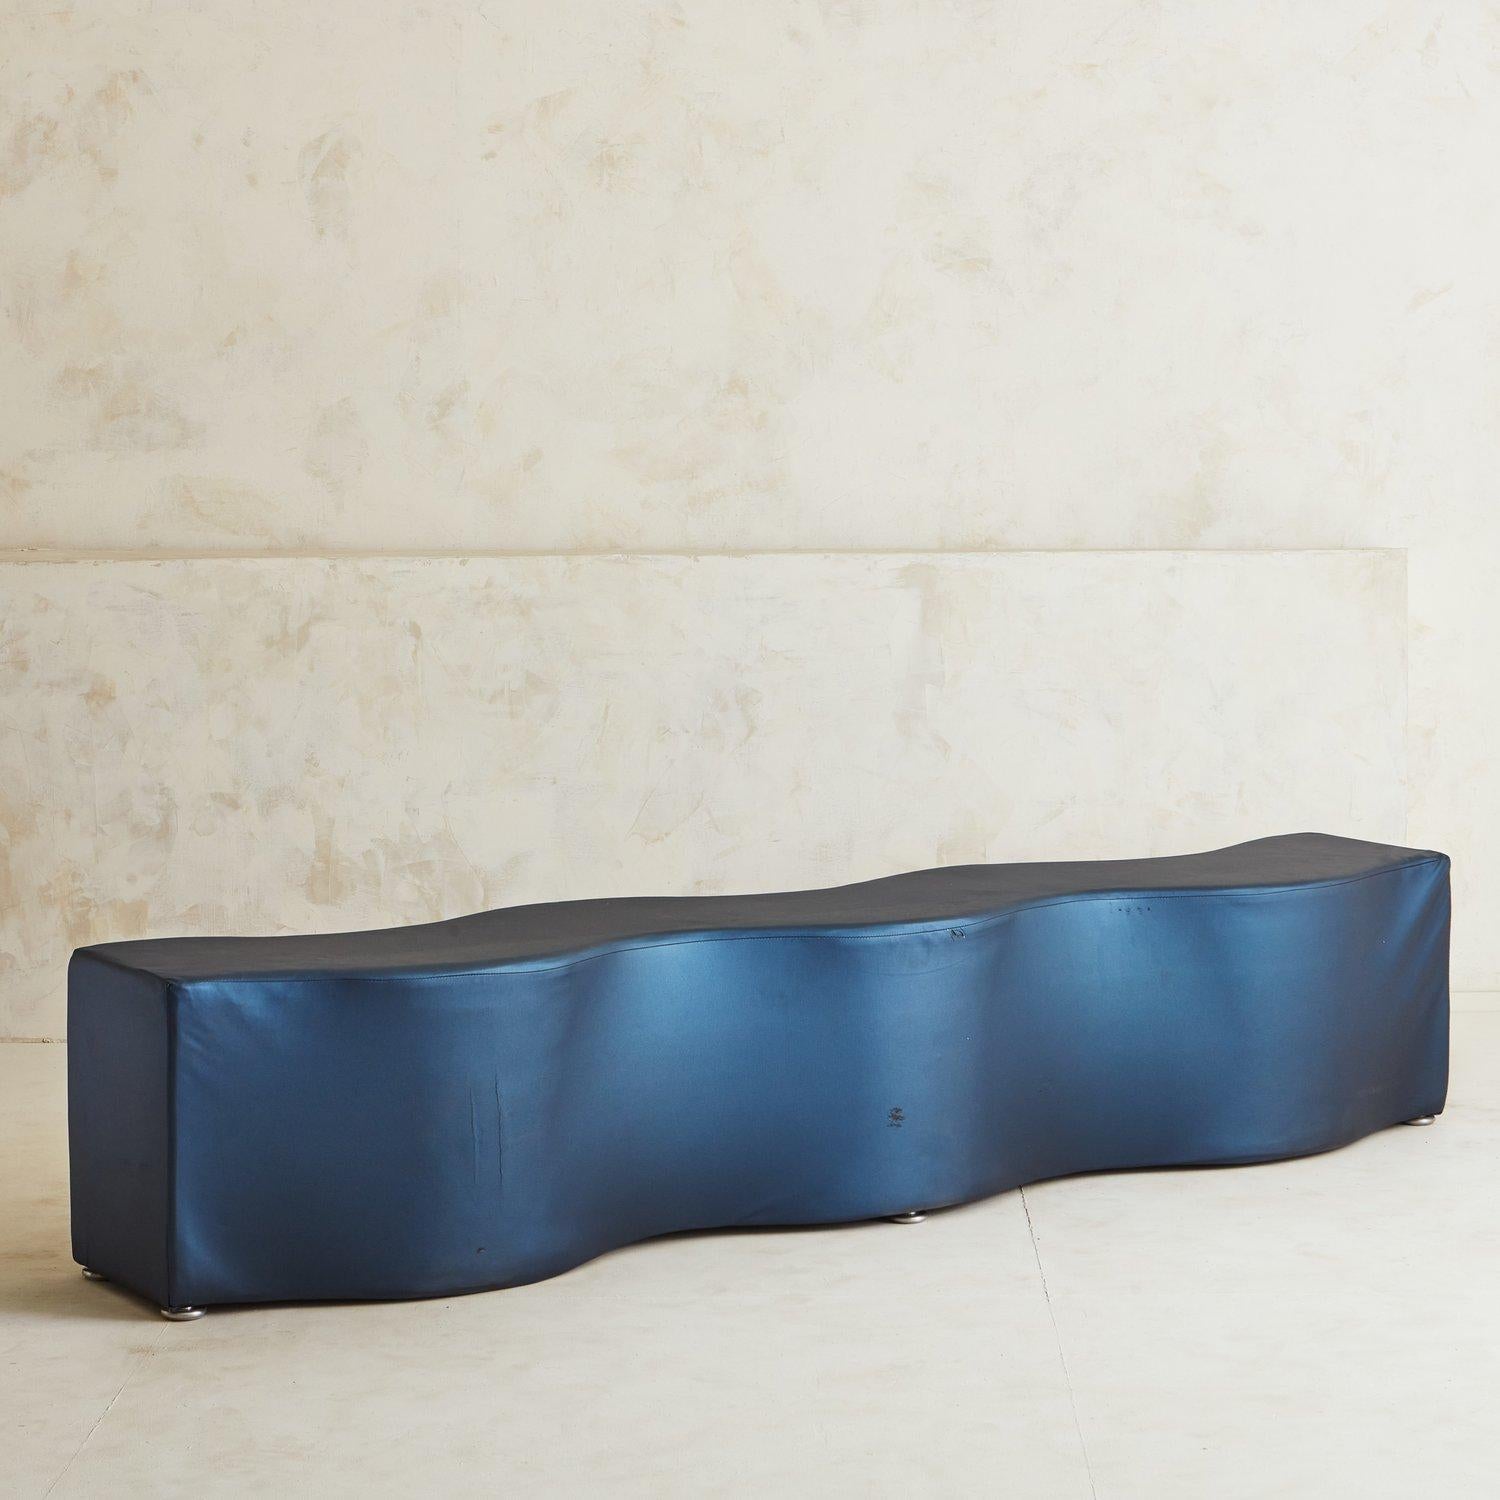 A playful curved bench featuring an organic form and original blue vinyl upholstery. This statement piece sits on four chrome feet that elevate it just slightly off the ground. Designed by Laurinda Spear for 'Brayton International.' Spear (1950—) is